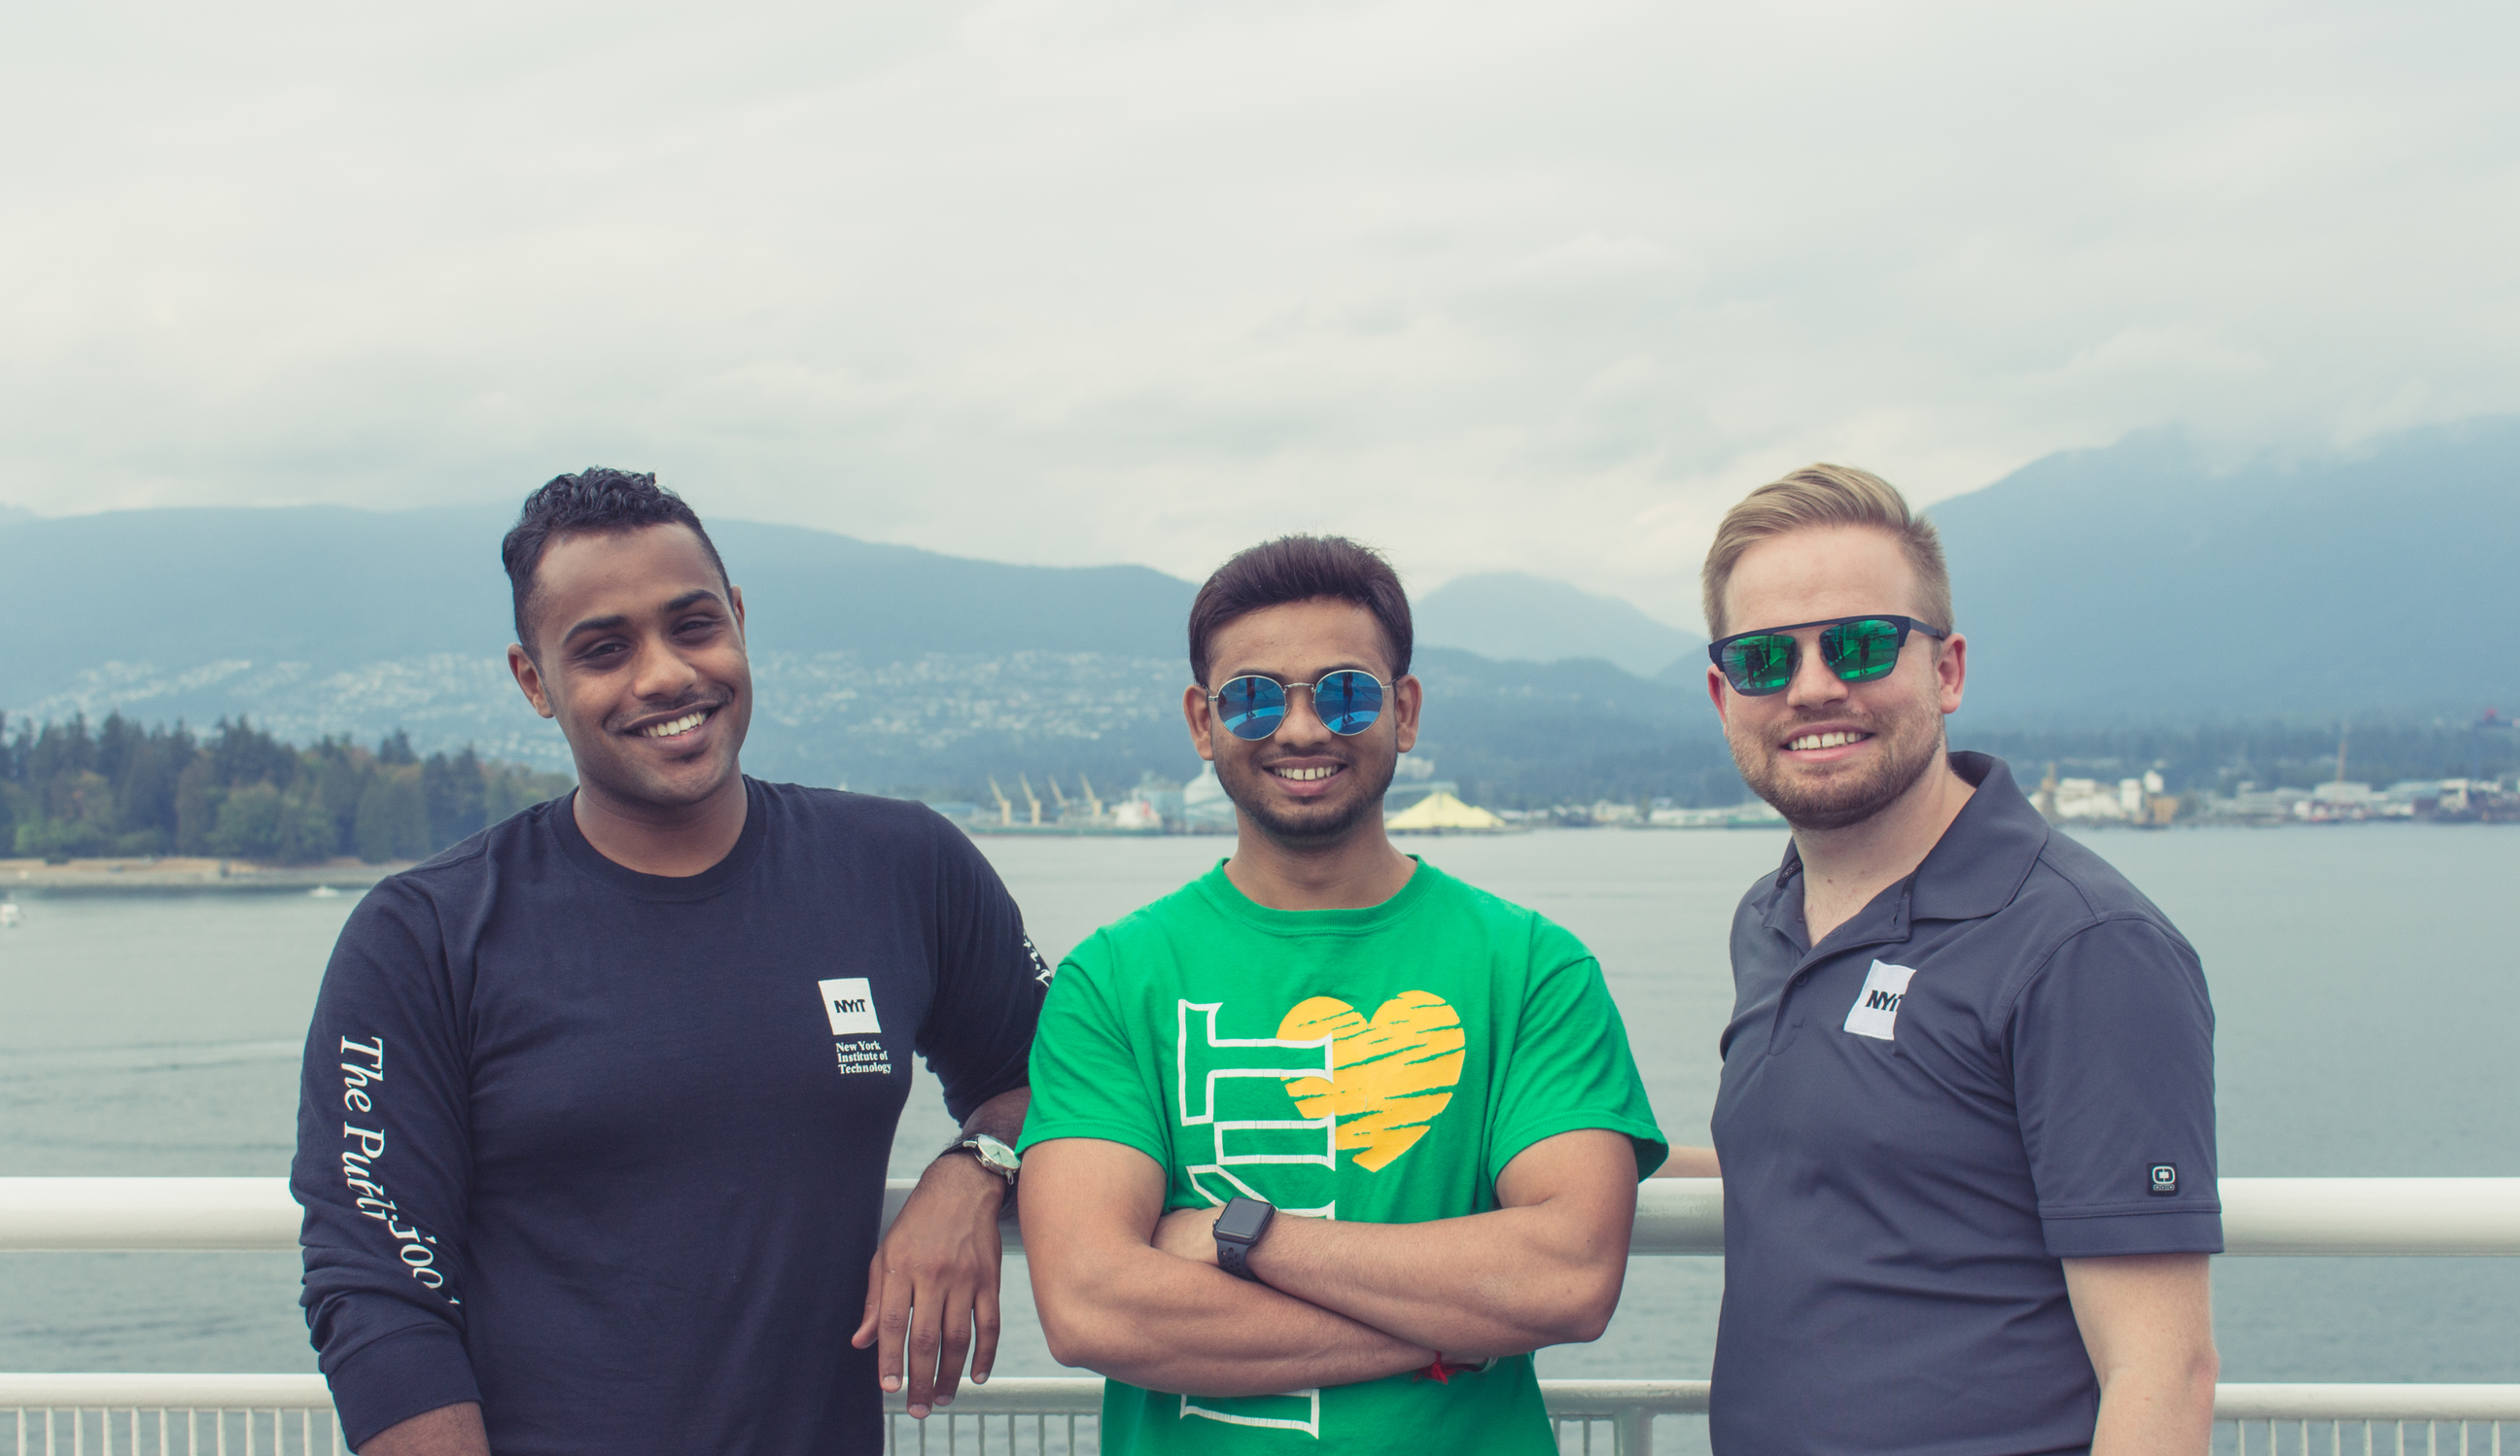 Student Life team at FlyOver Canada